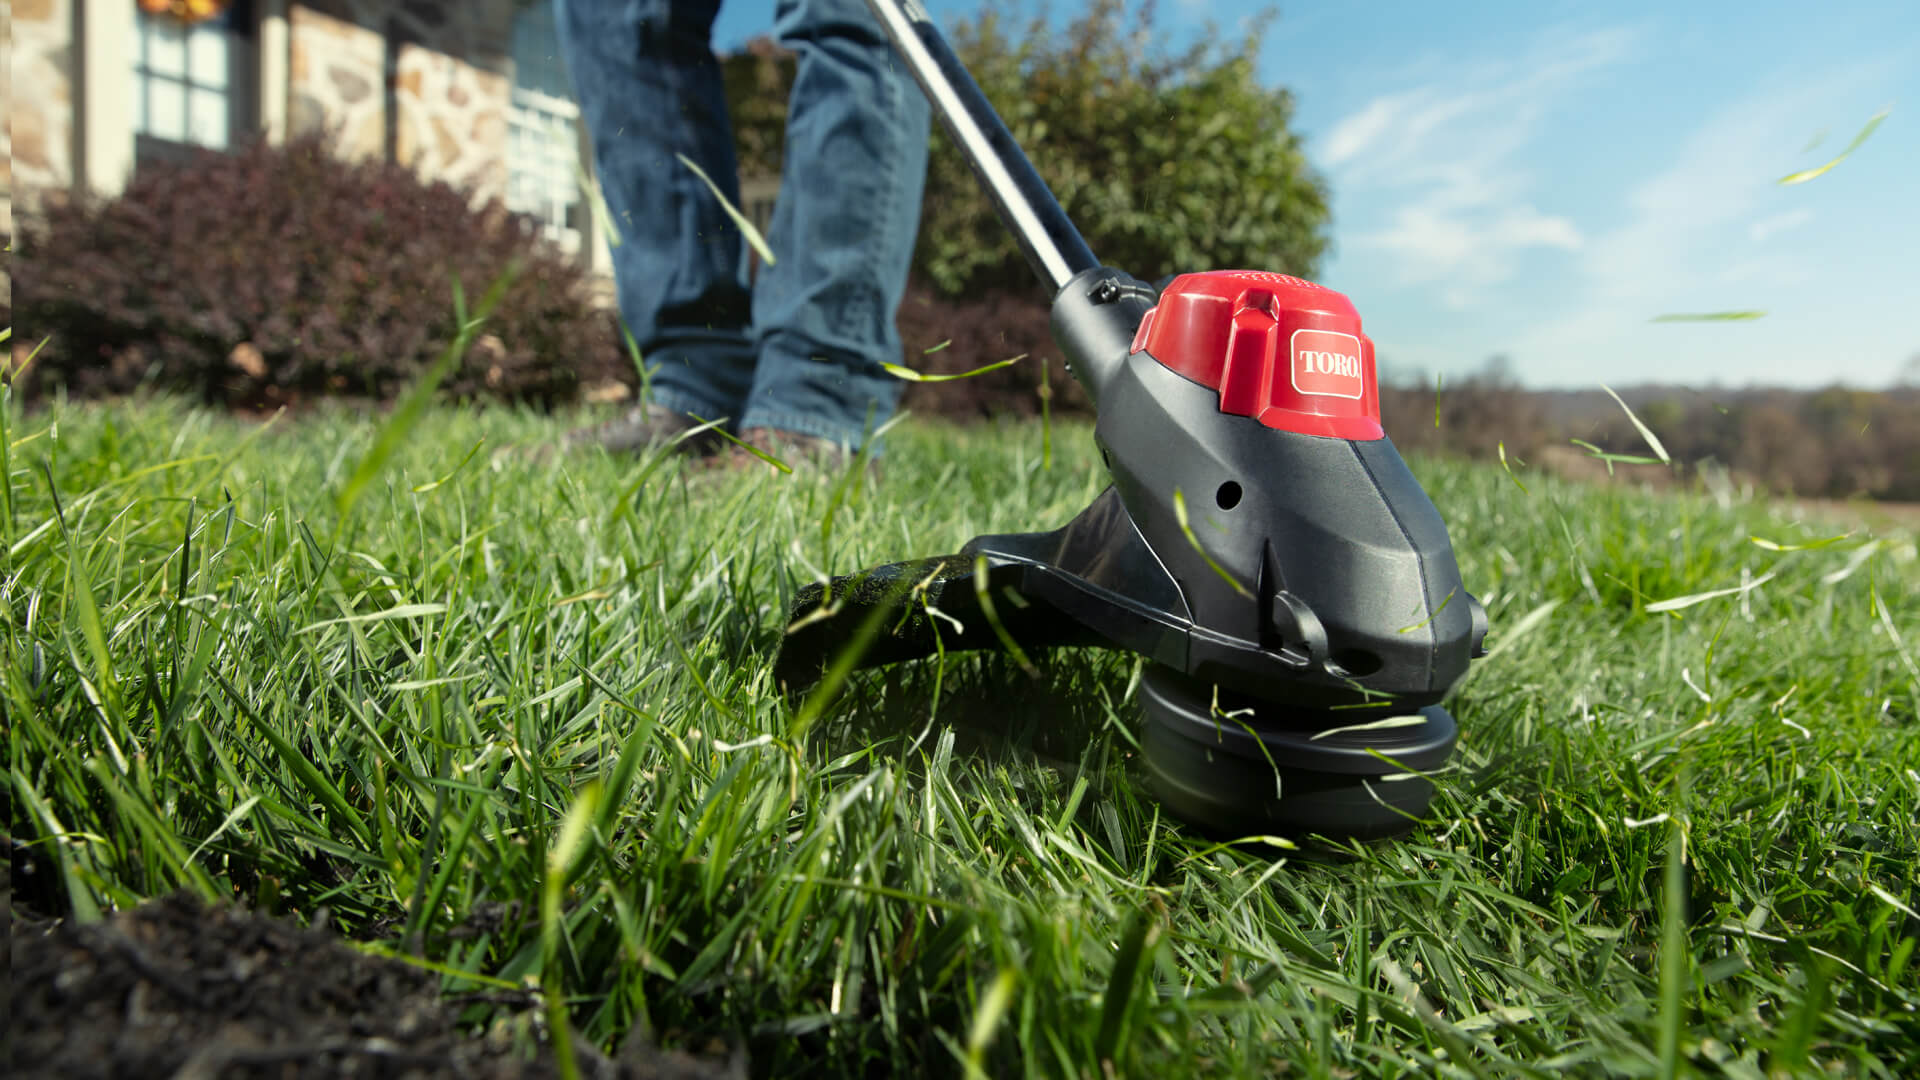 Toro String Trimmer in action